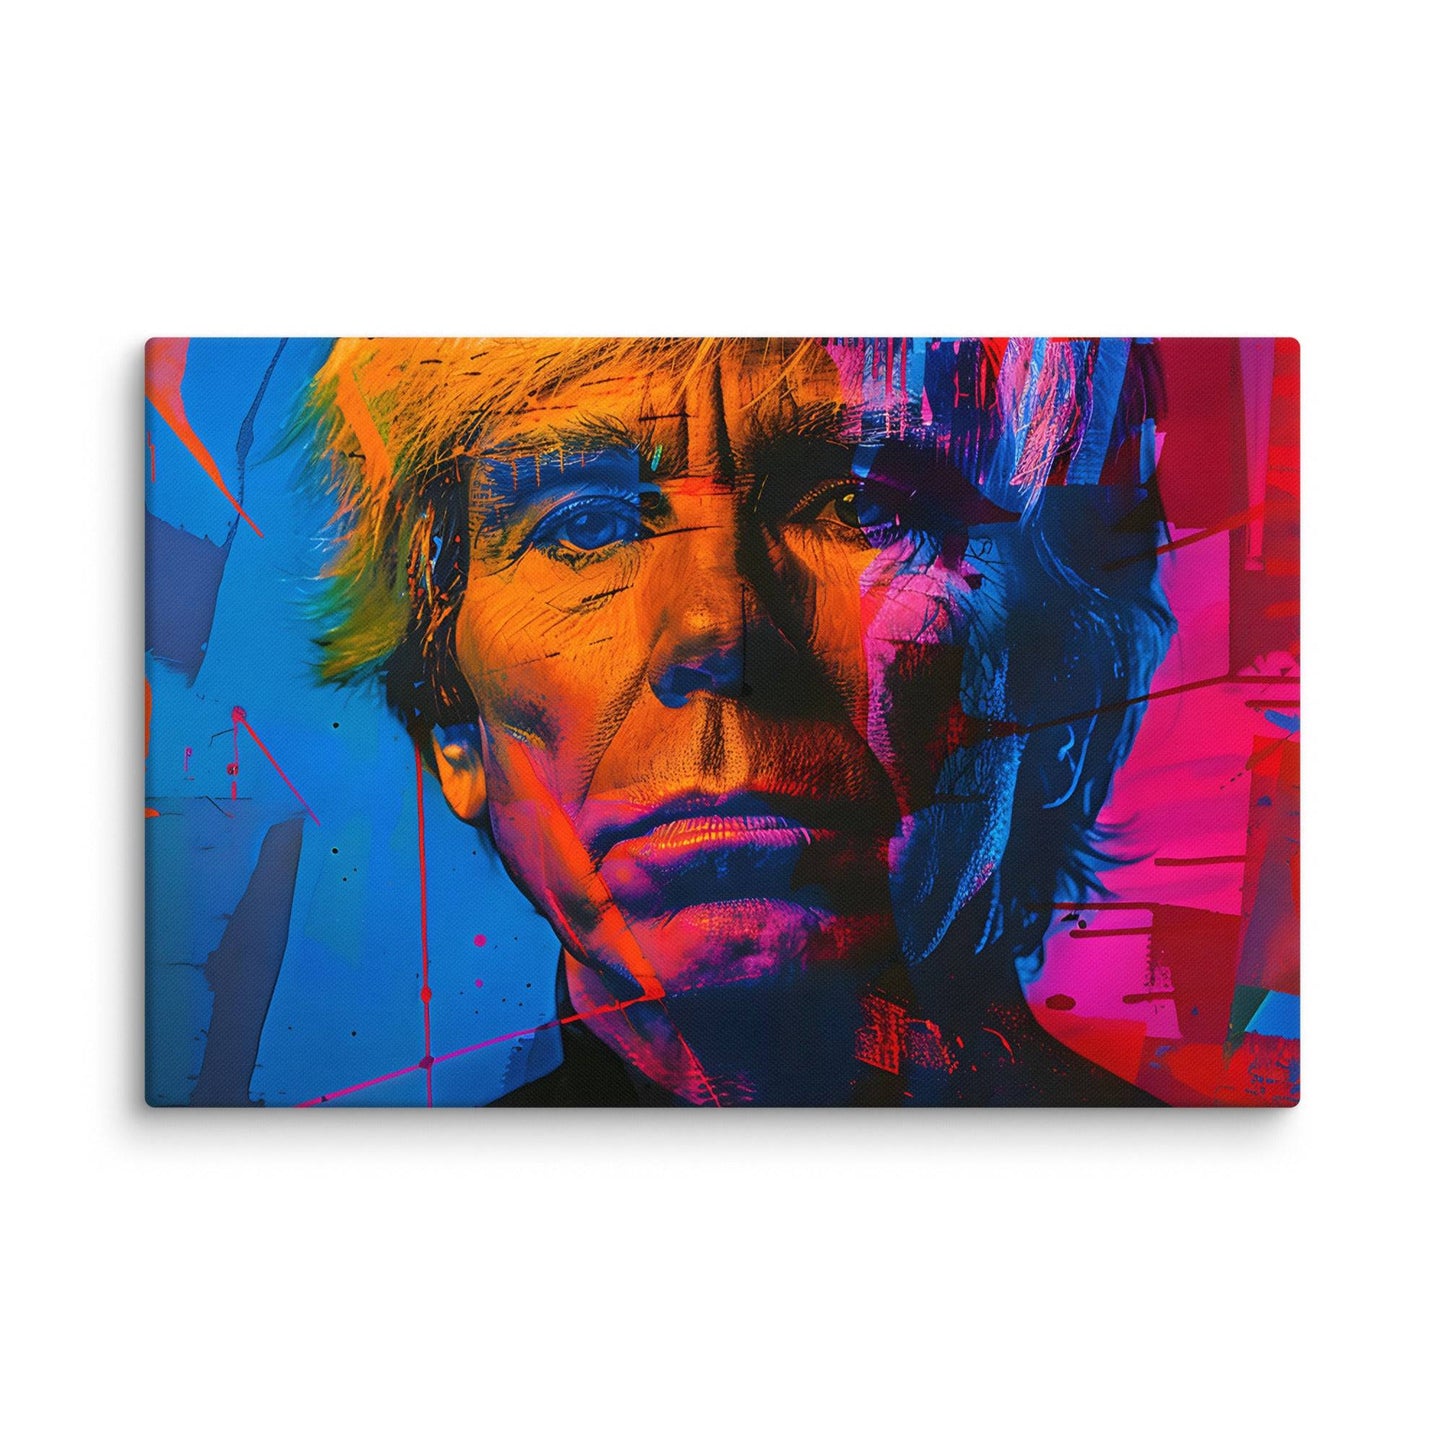 A vibrant, abstract portrait of a man with an intense gaze. His face is illuminated in bold colors, primarily orange, blue, and red, with striking contrasts and dynamic brushstrokes. The background features a mix of geometric shapes and splashes of color, enhancing the overall intensity and energy of the artwork. The man’s expression is serious and contemplative, and the style is reminiscent of pop art.